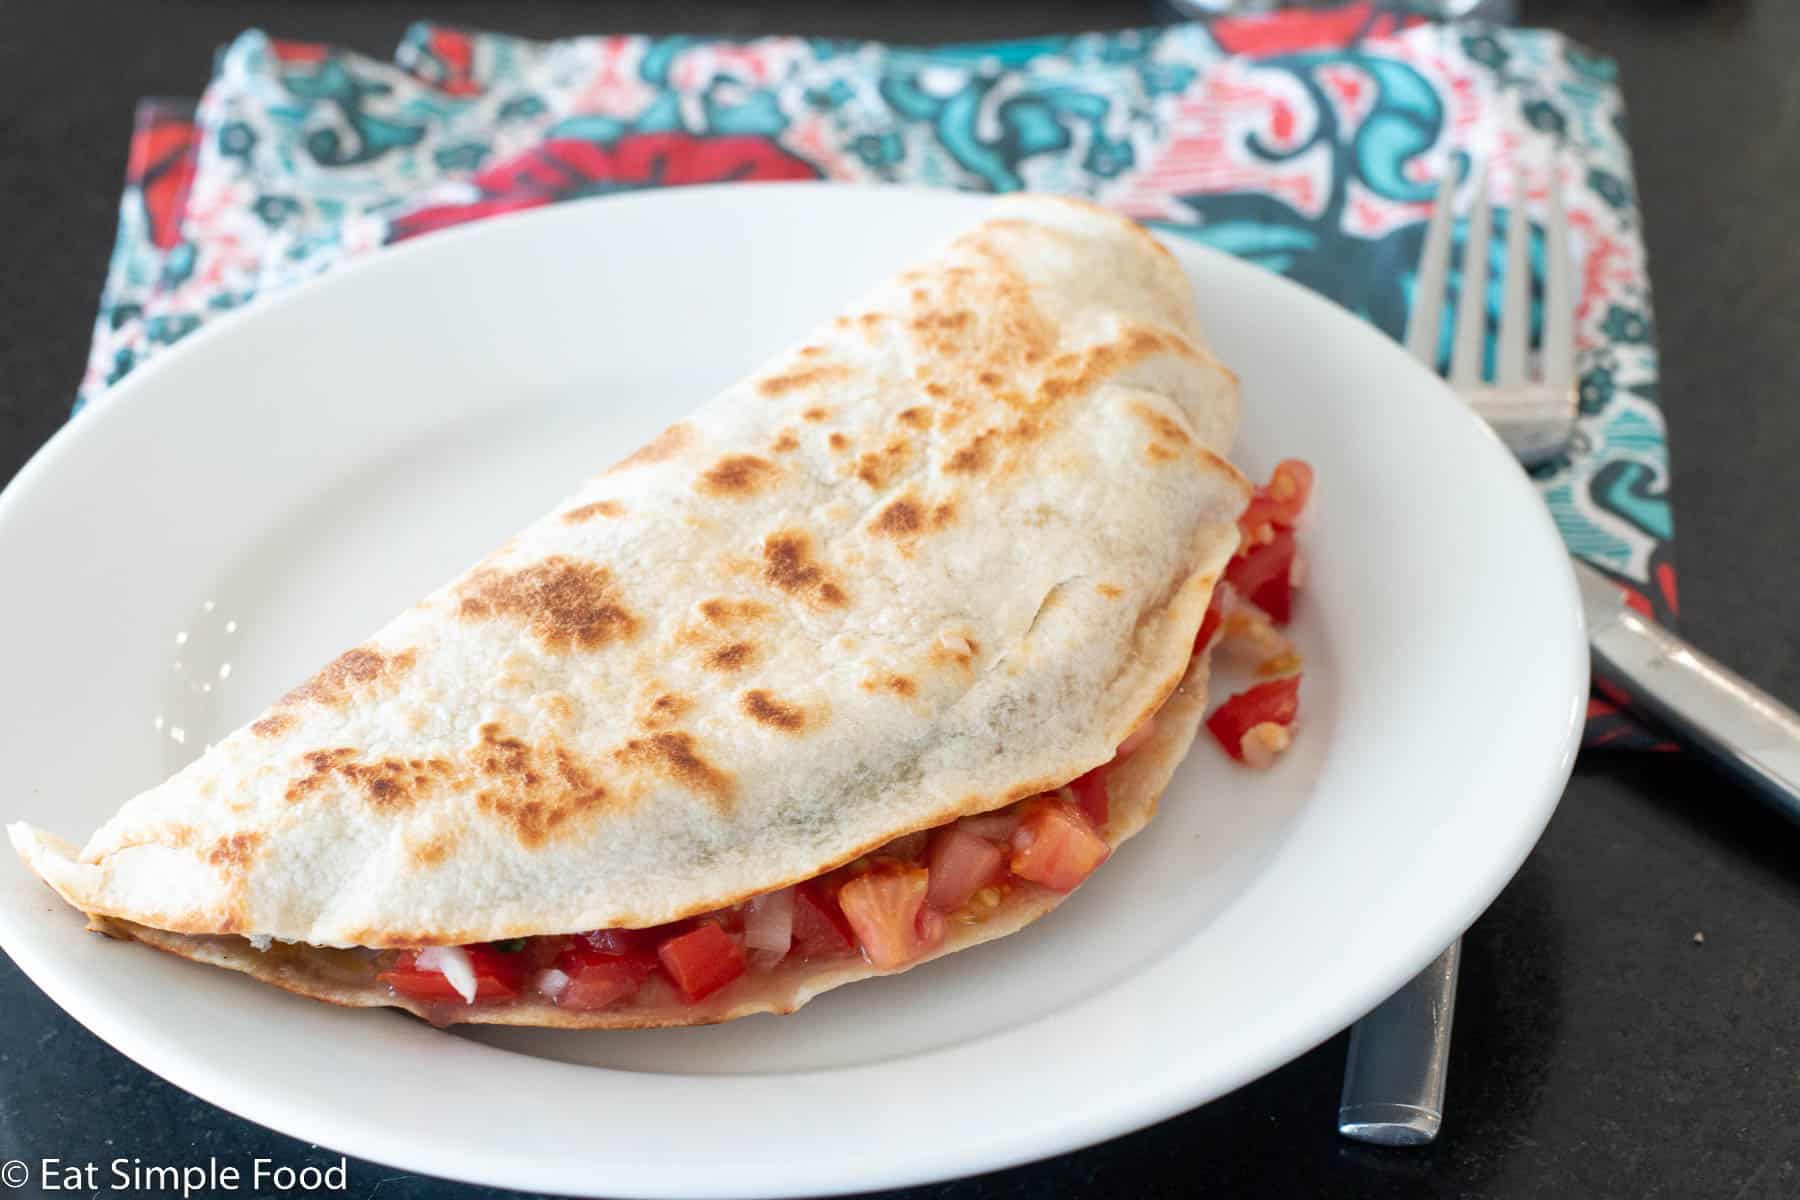 Browned flour tortilla folded in half filled with ingredients like tomatoes on a white plate. Fork and knife and blue and red napkin in background.